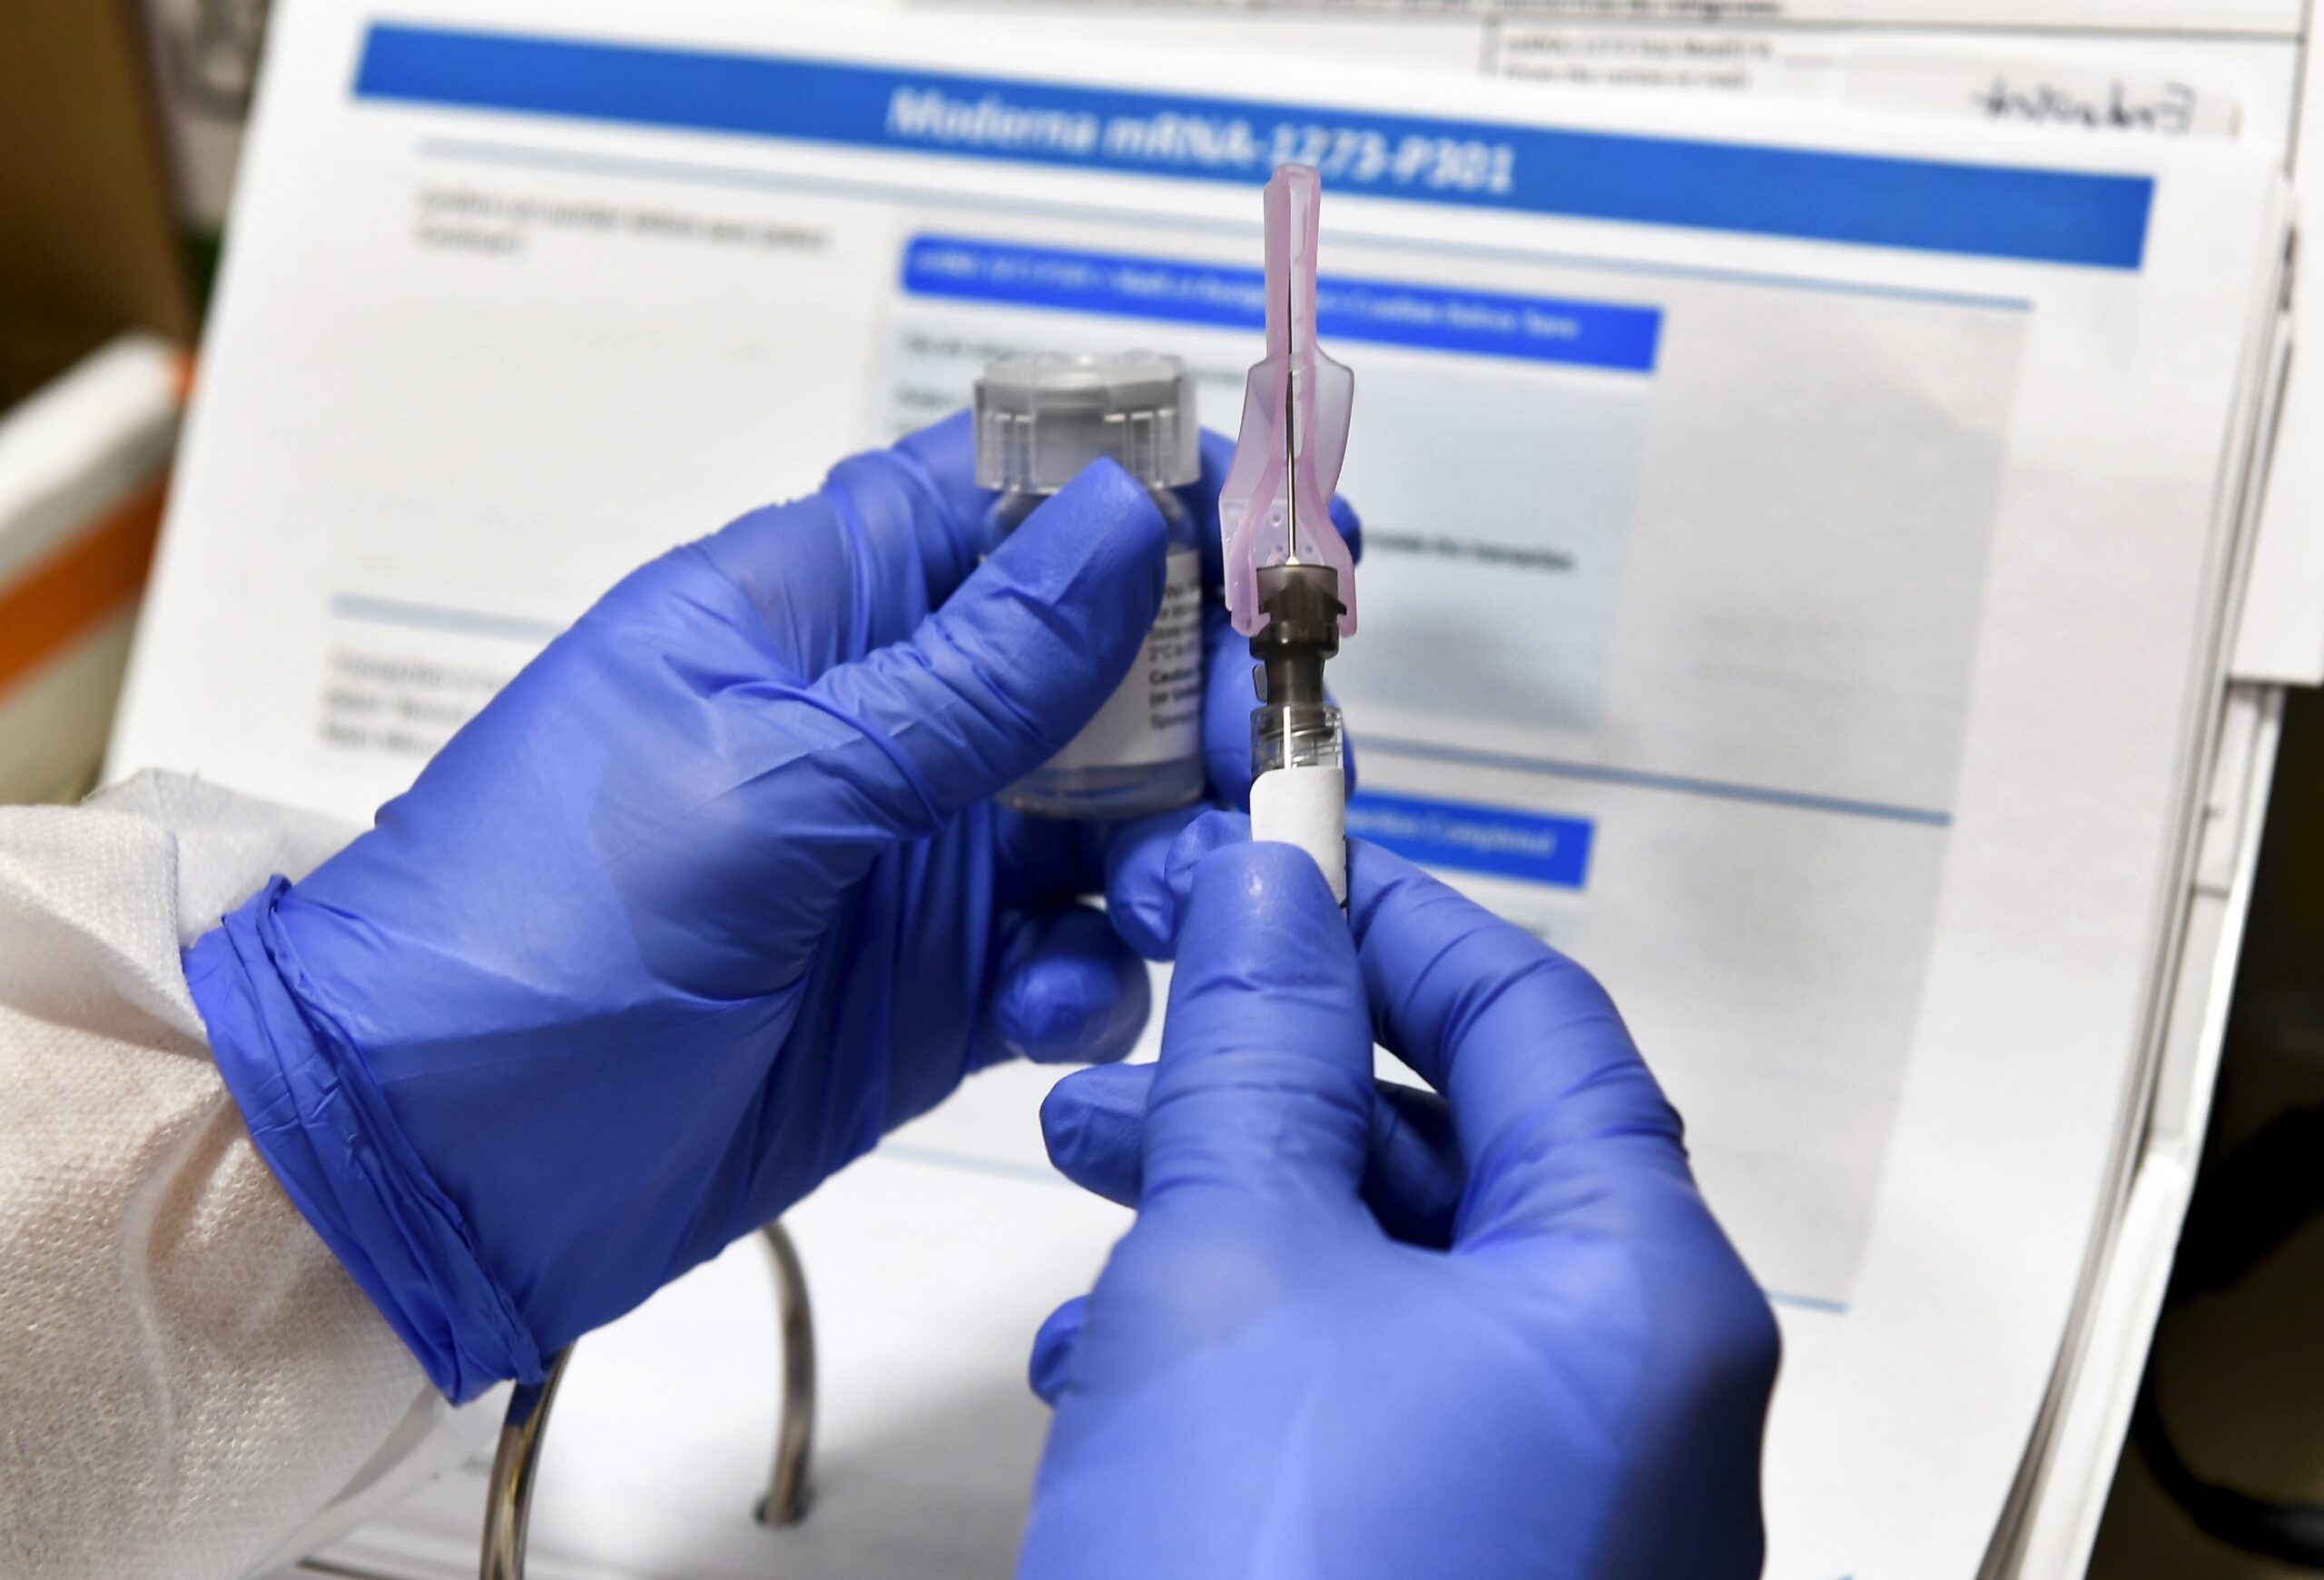 Two hands with blue gloves hold a syringe of fluid being tested as the COVID-19 vaccine